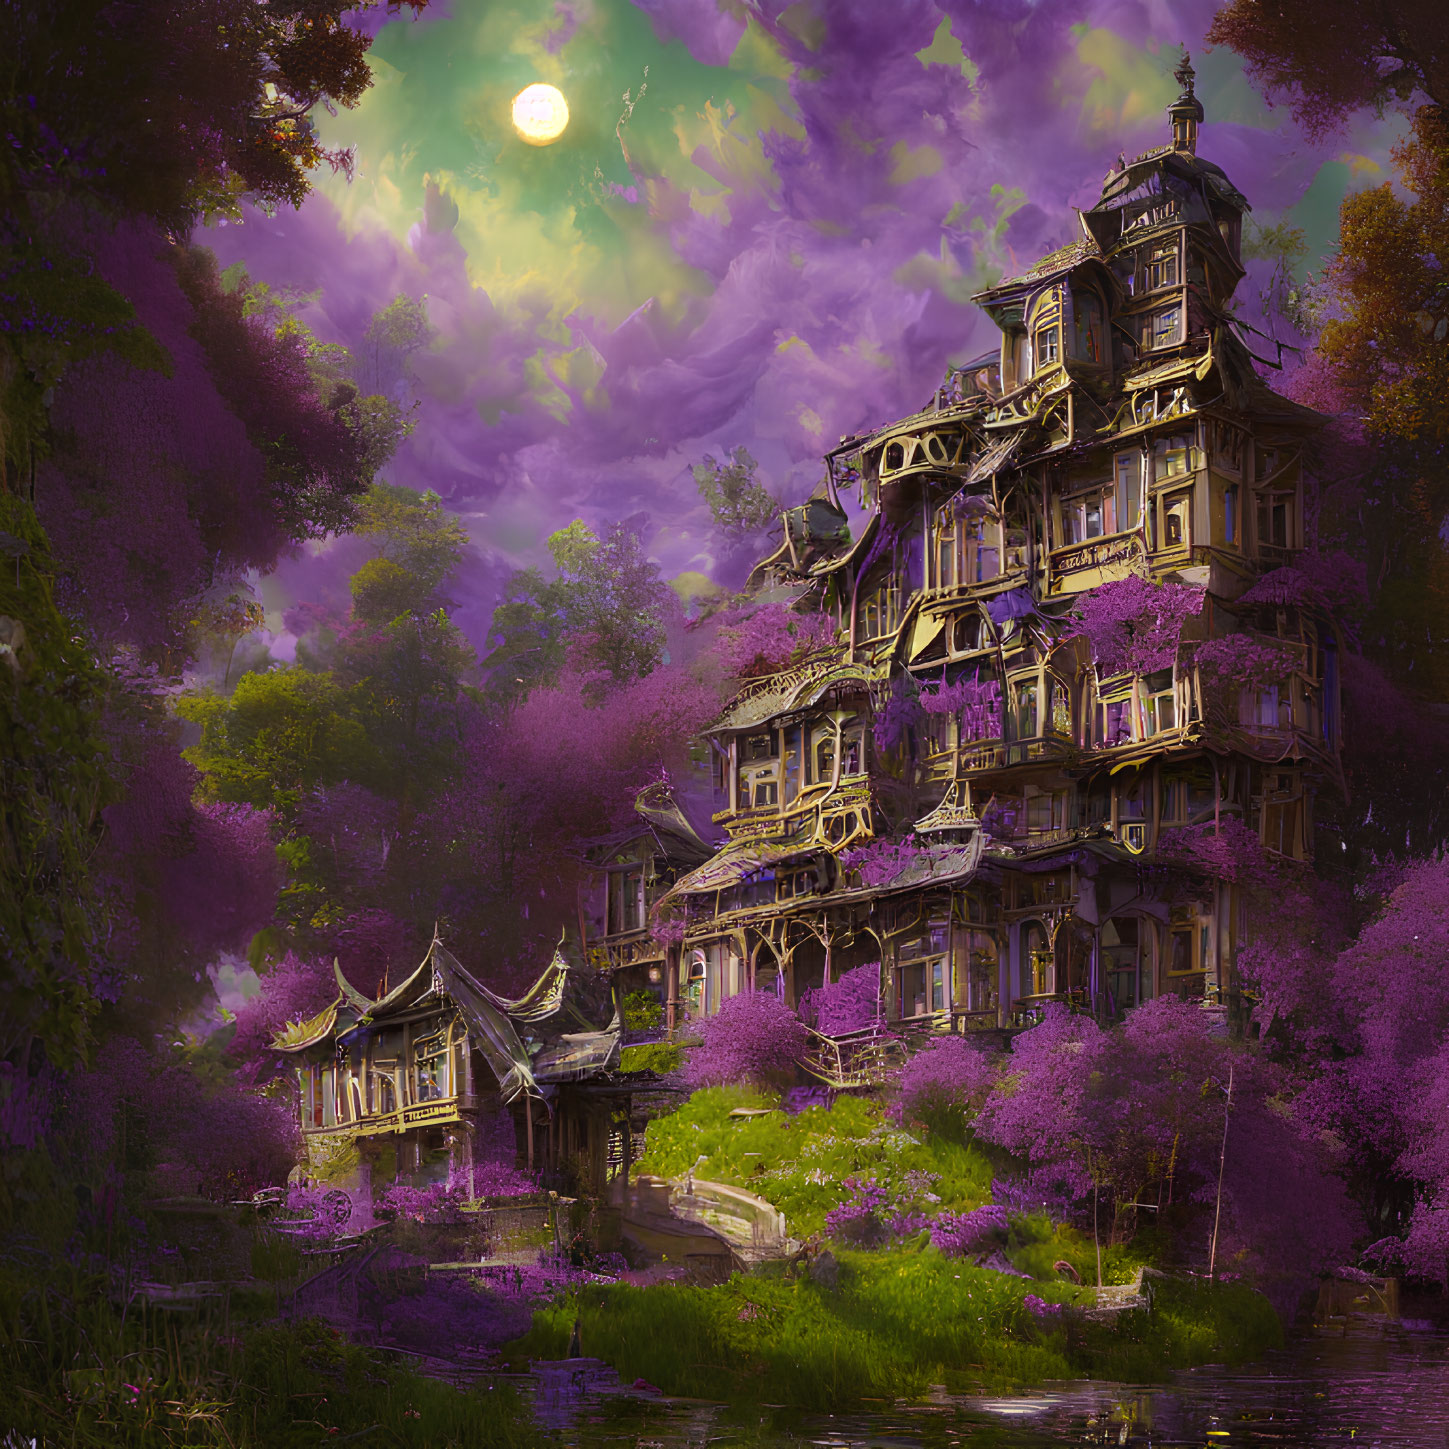 Victorian-style mansion in mystical moonlit setting